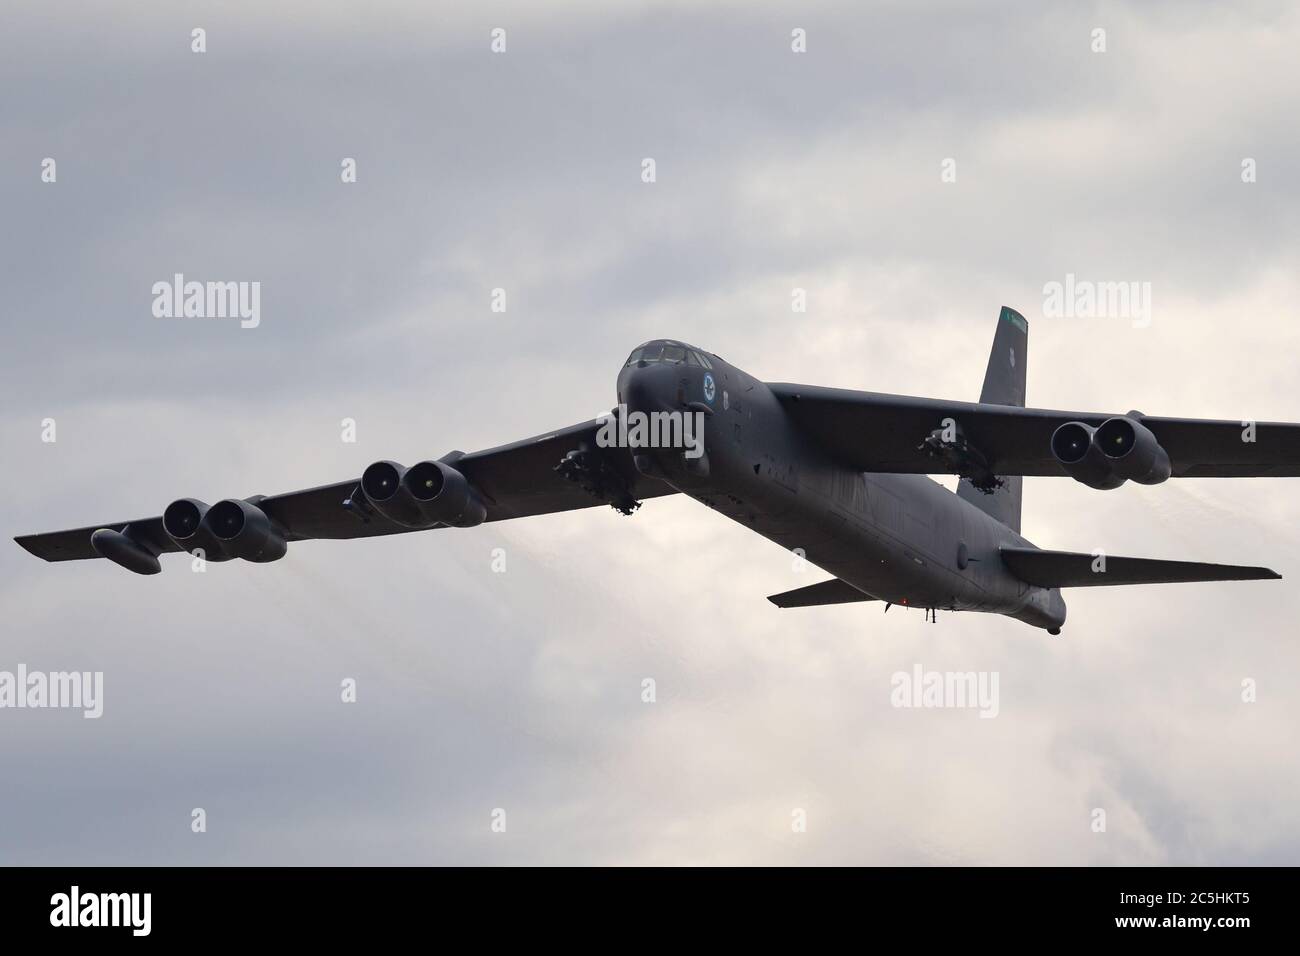 United States Air Force (USAF) Boeing B-52H Stratofortress strategic bomber aircraft. Stock Photo